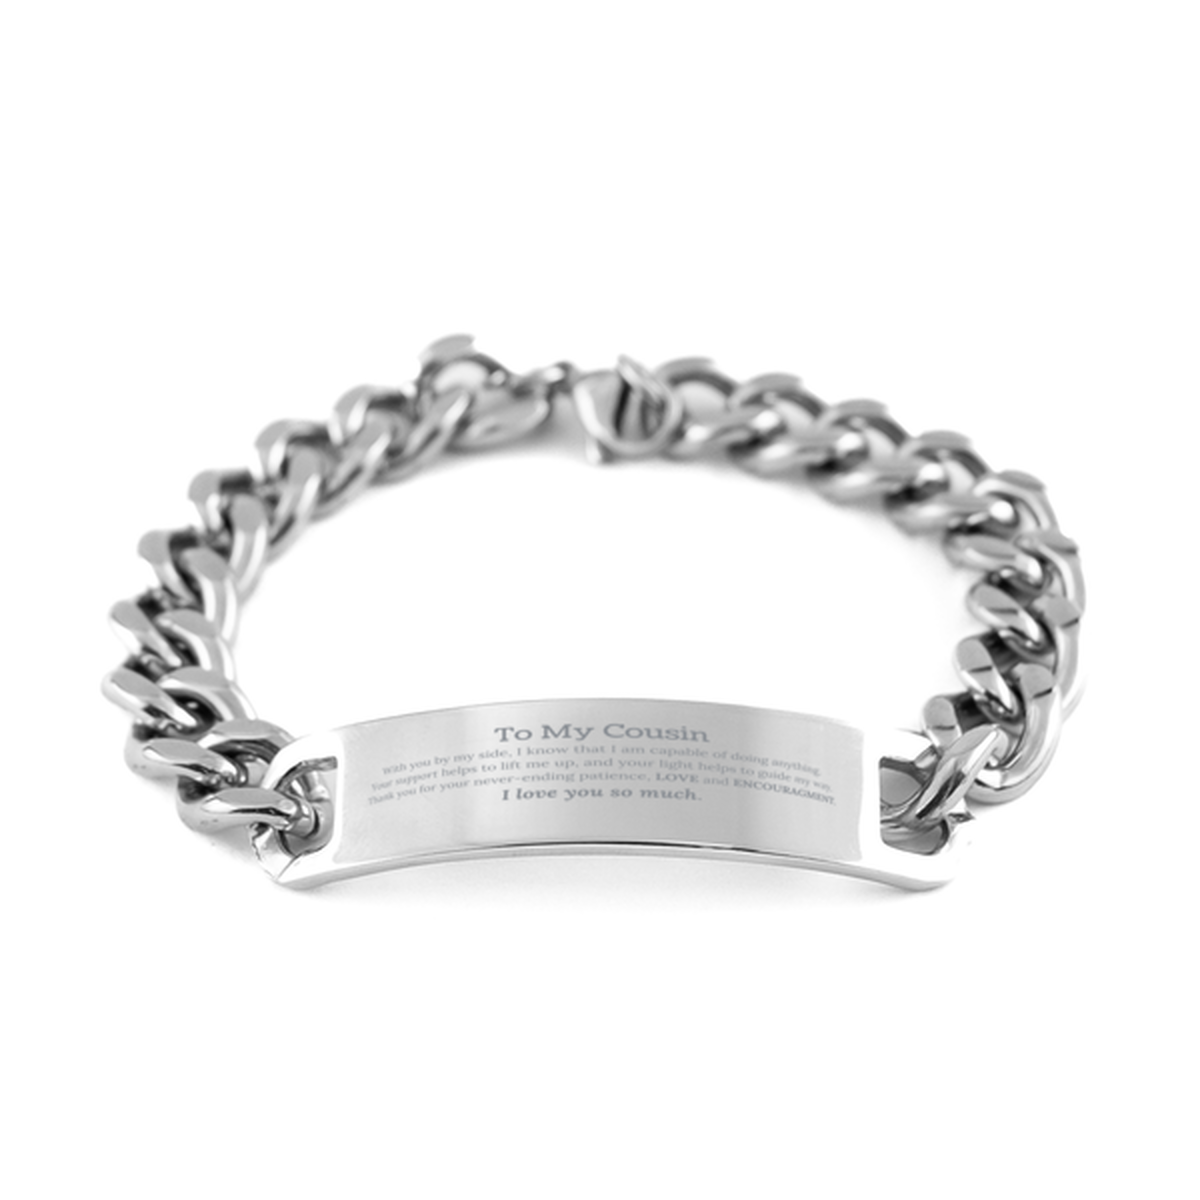 Appreciation Cousin Cuban Chain Stainless Steel Bracelet Gifts, To My Cousin Birthday Christmas Wedding Keepsake Gifts for Cousin With you by my side, I know that I am capable of doing anything. I love you so much